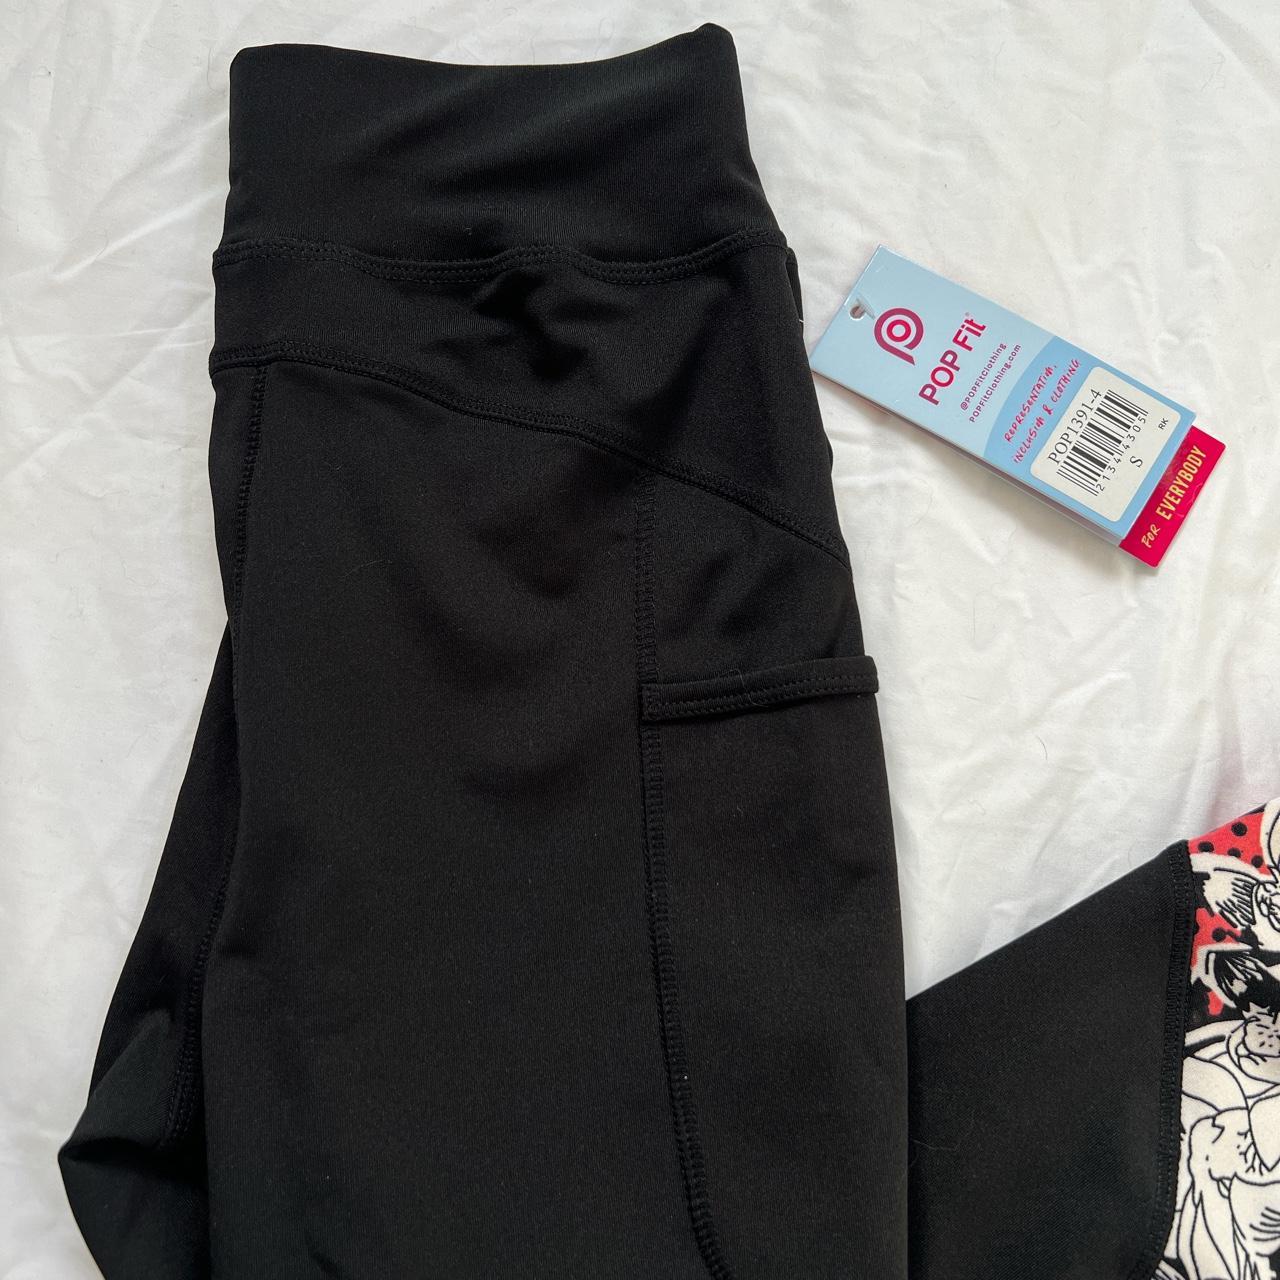 brand new with tag black leggings from pop fit! - Depop